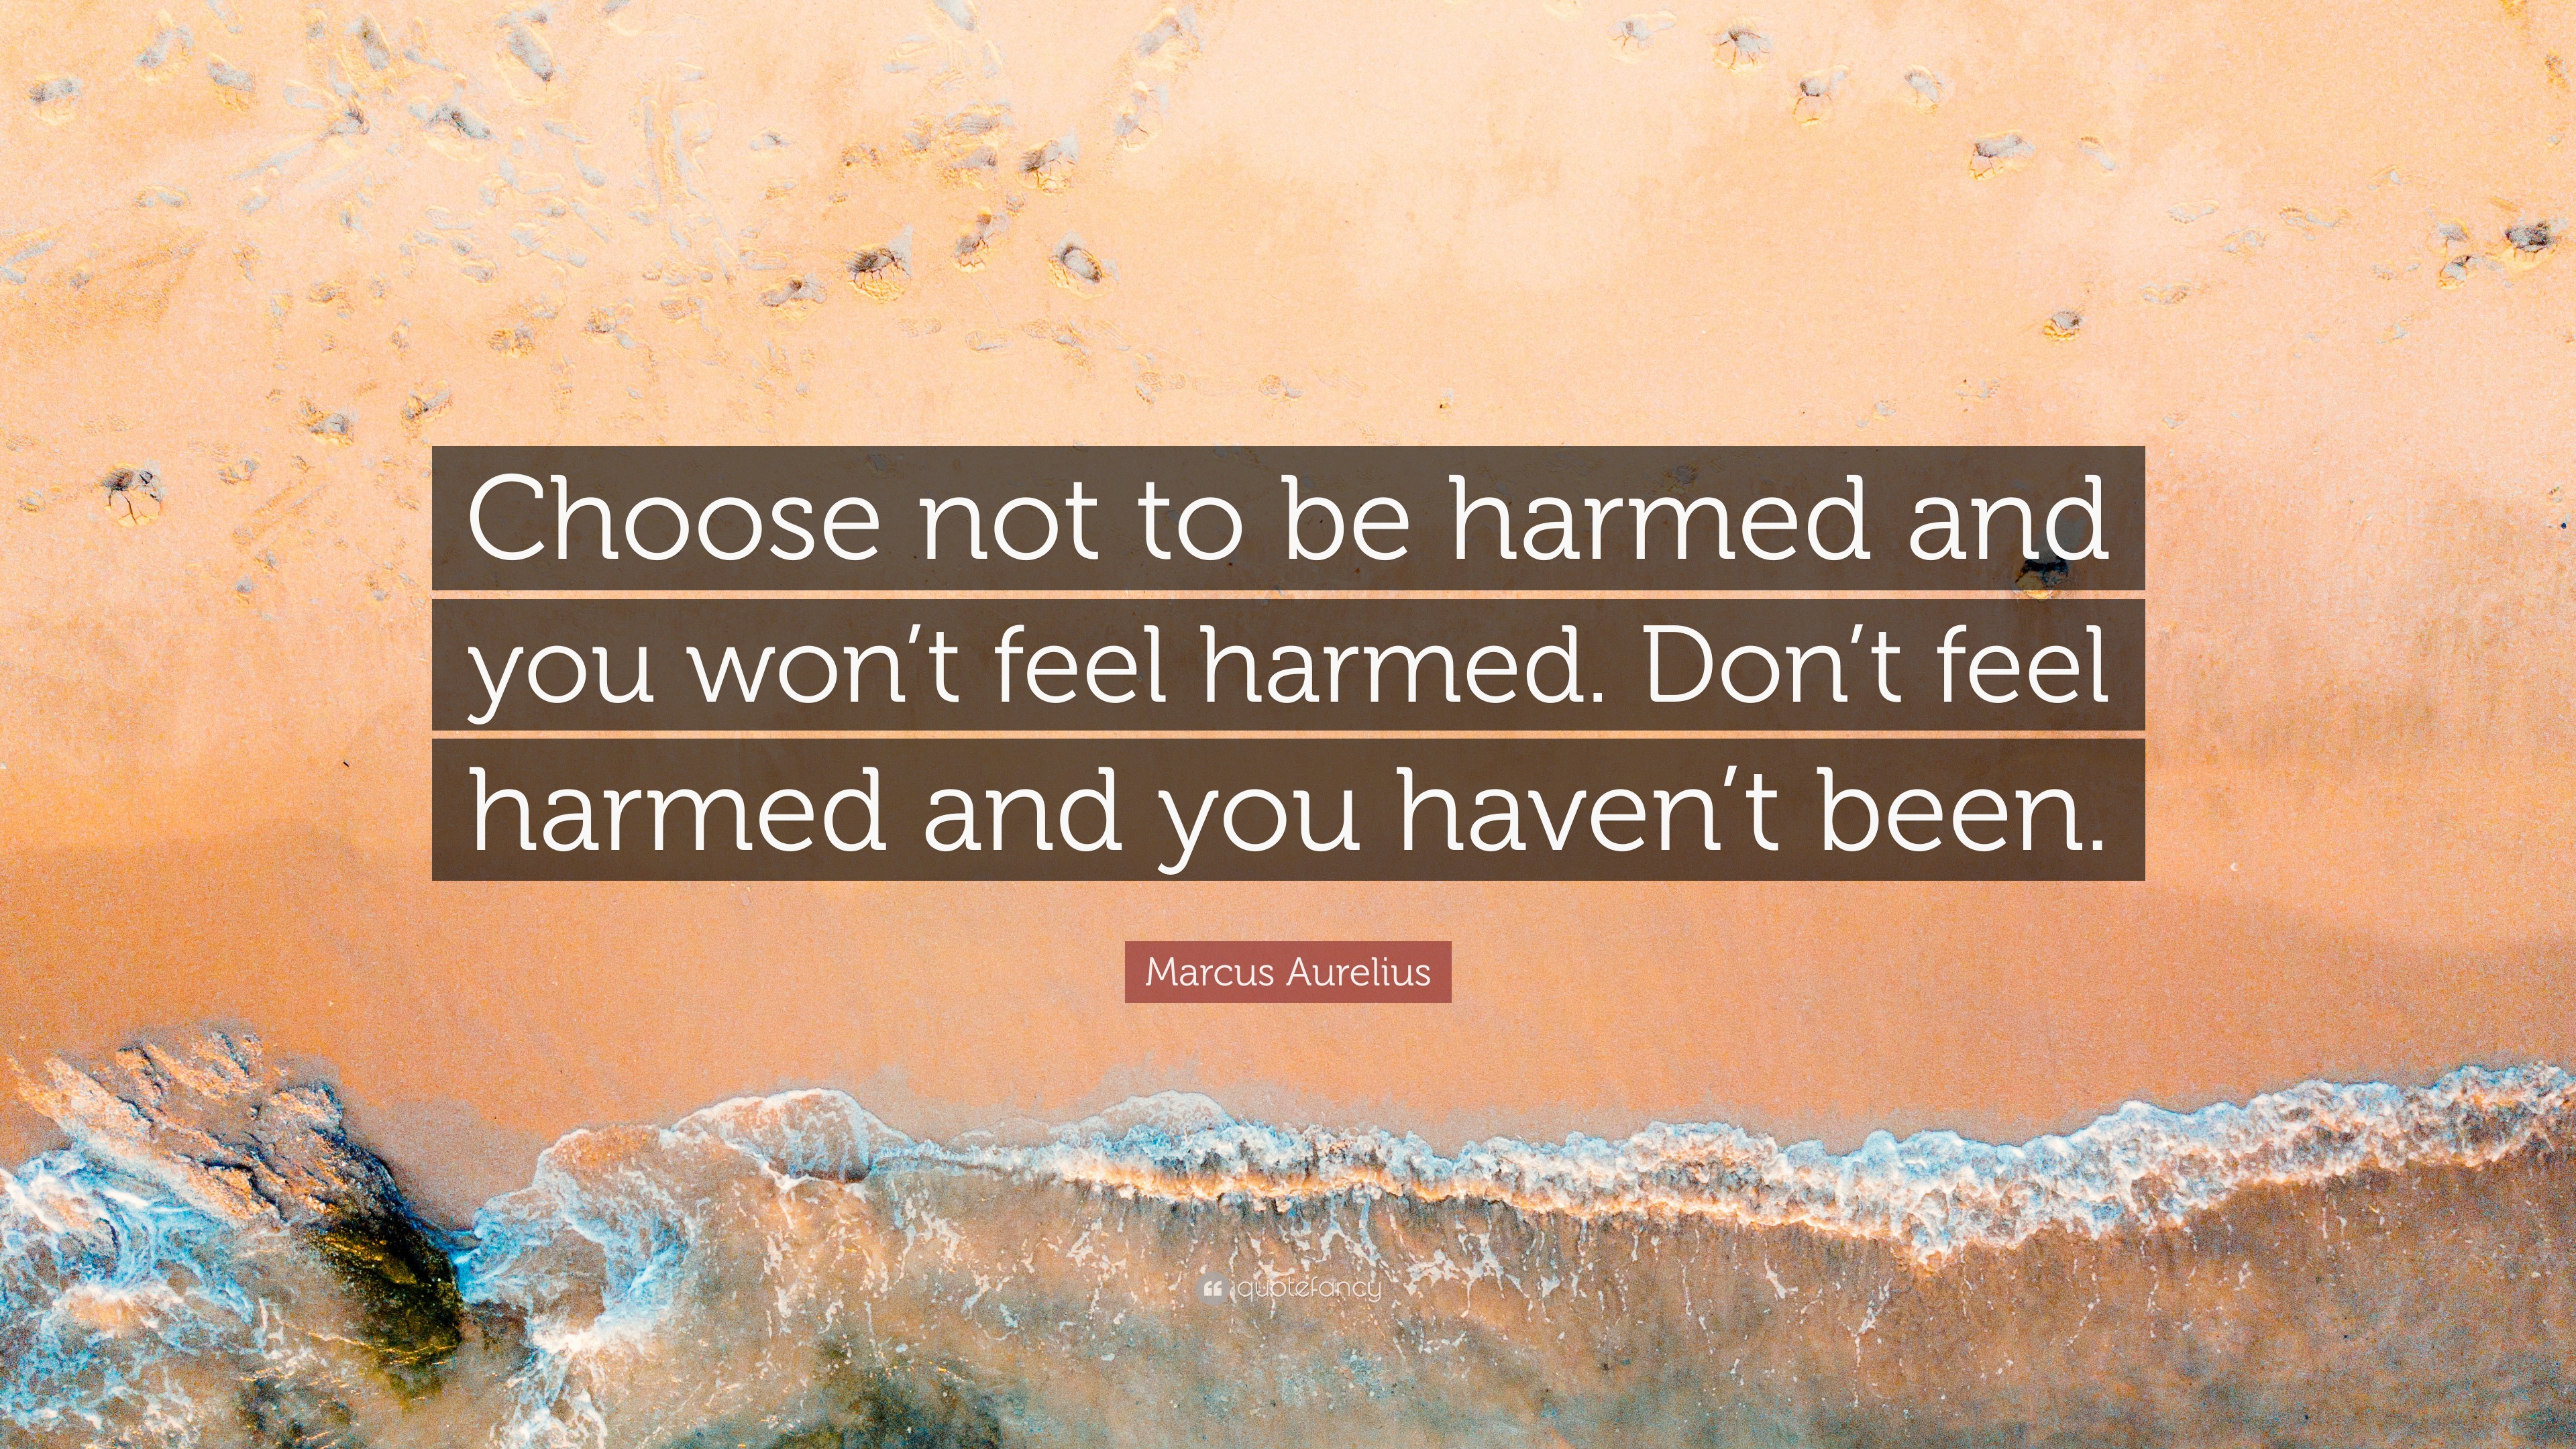 Choose not to be harmed and you won’t feel harmed. 